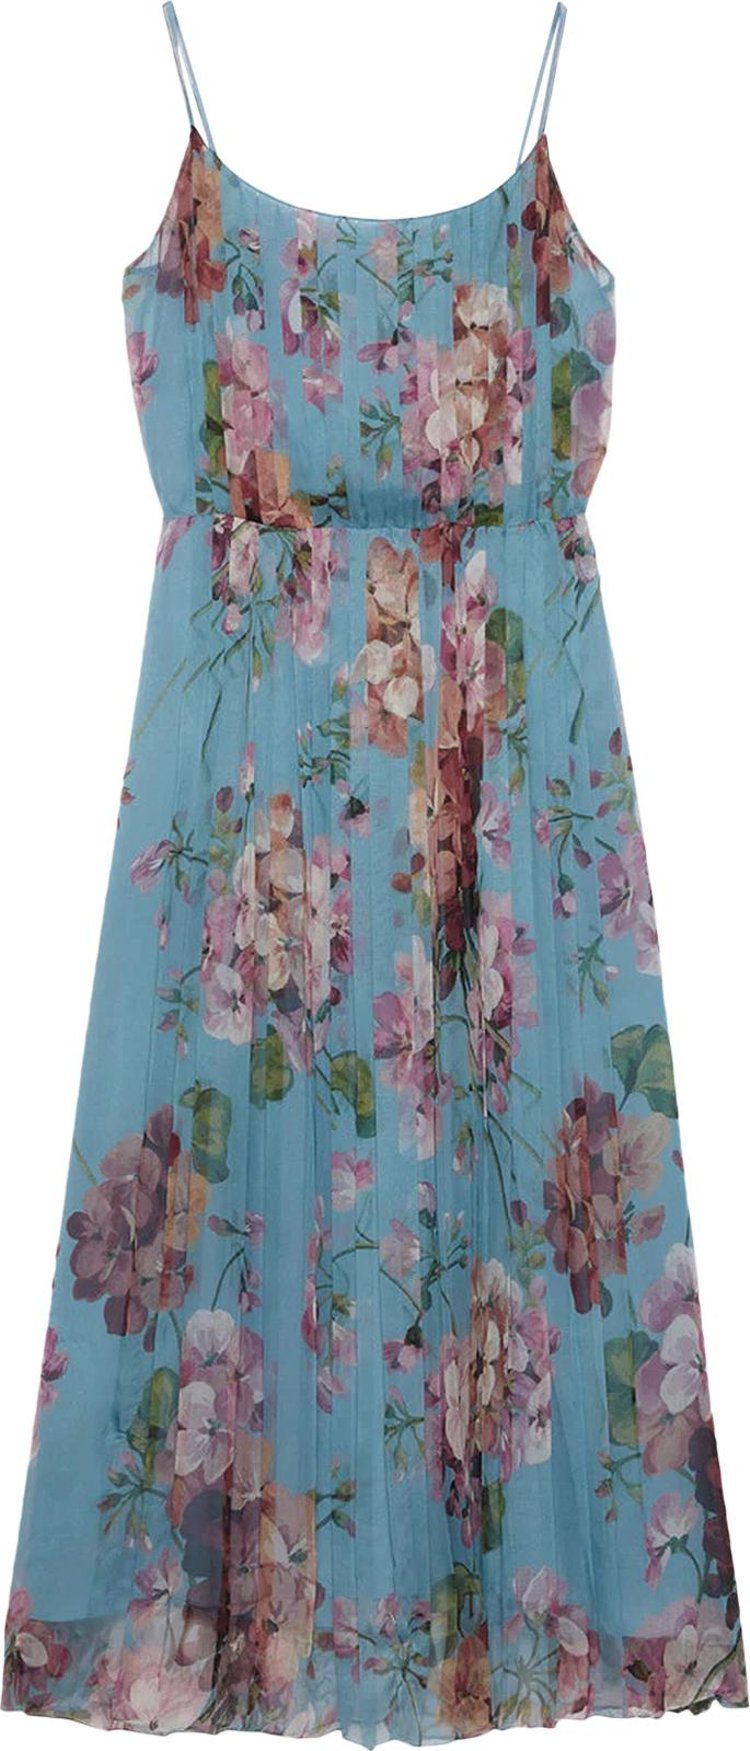 Gucci 2015 Re-Edition Floral Chiffon Dress 'Clear Sky Printed'